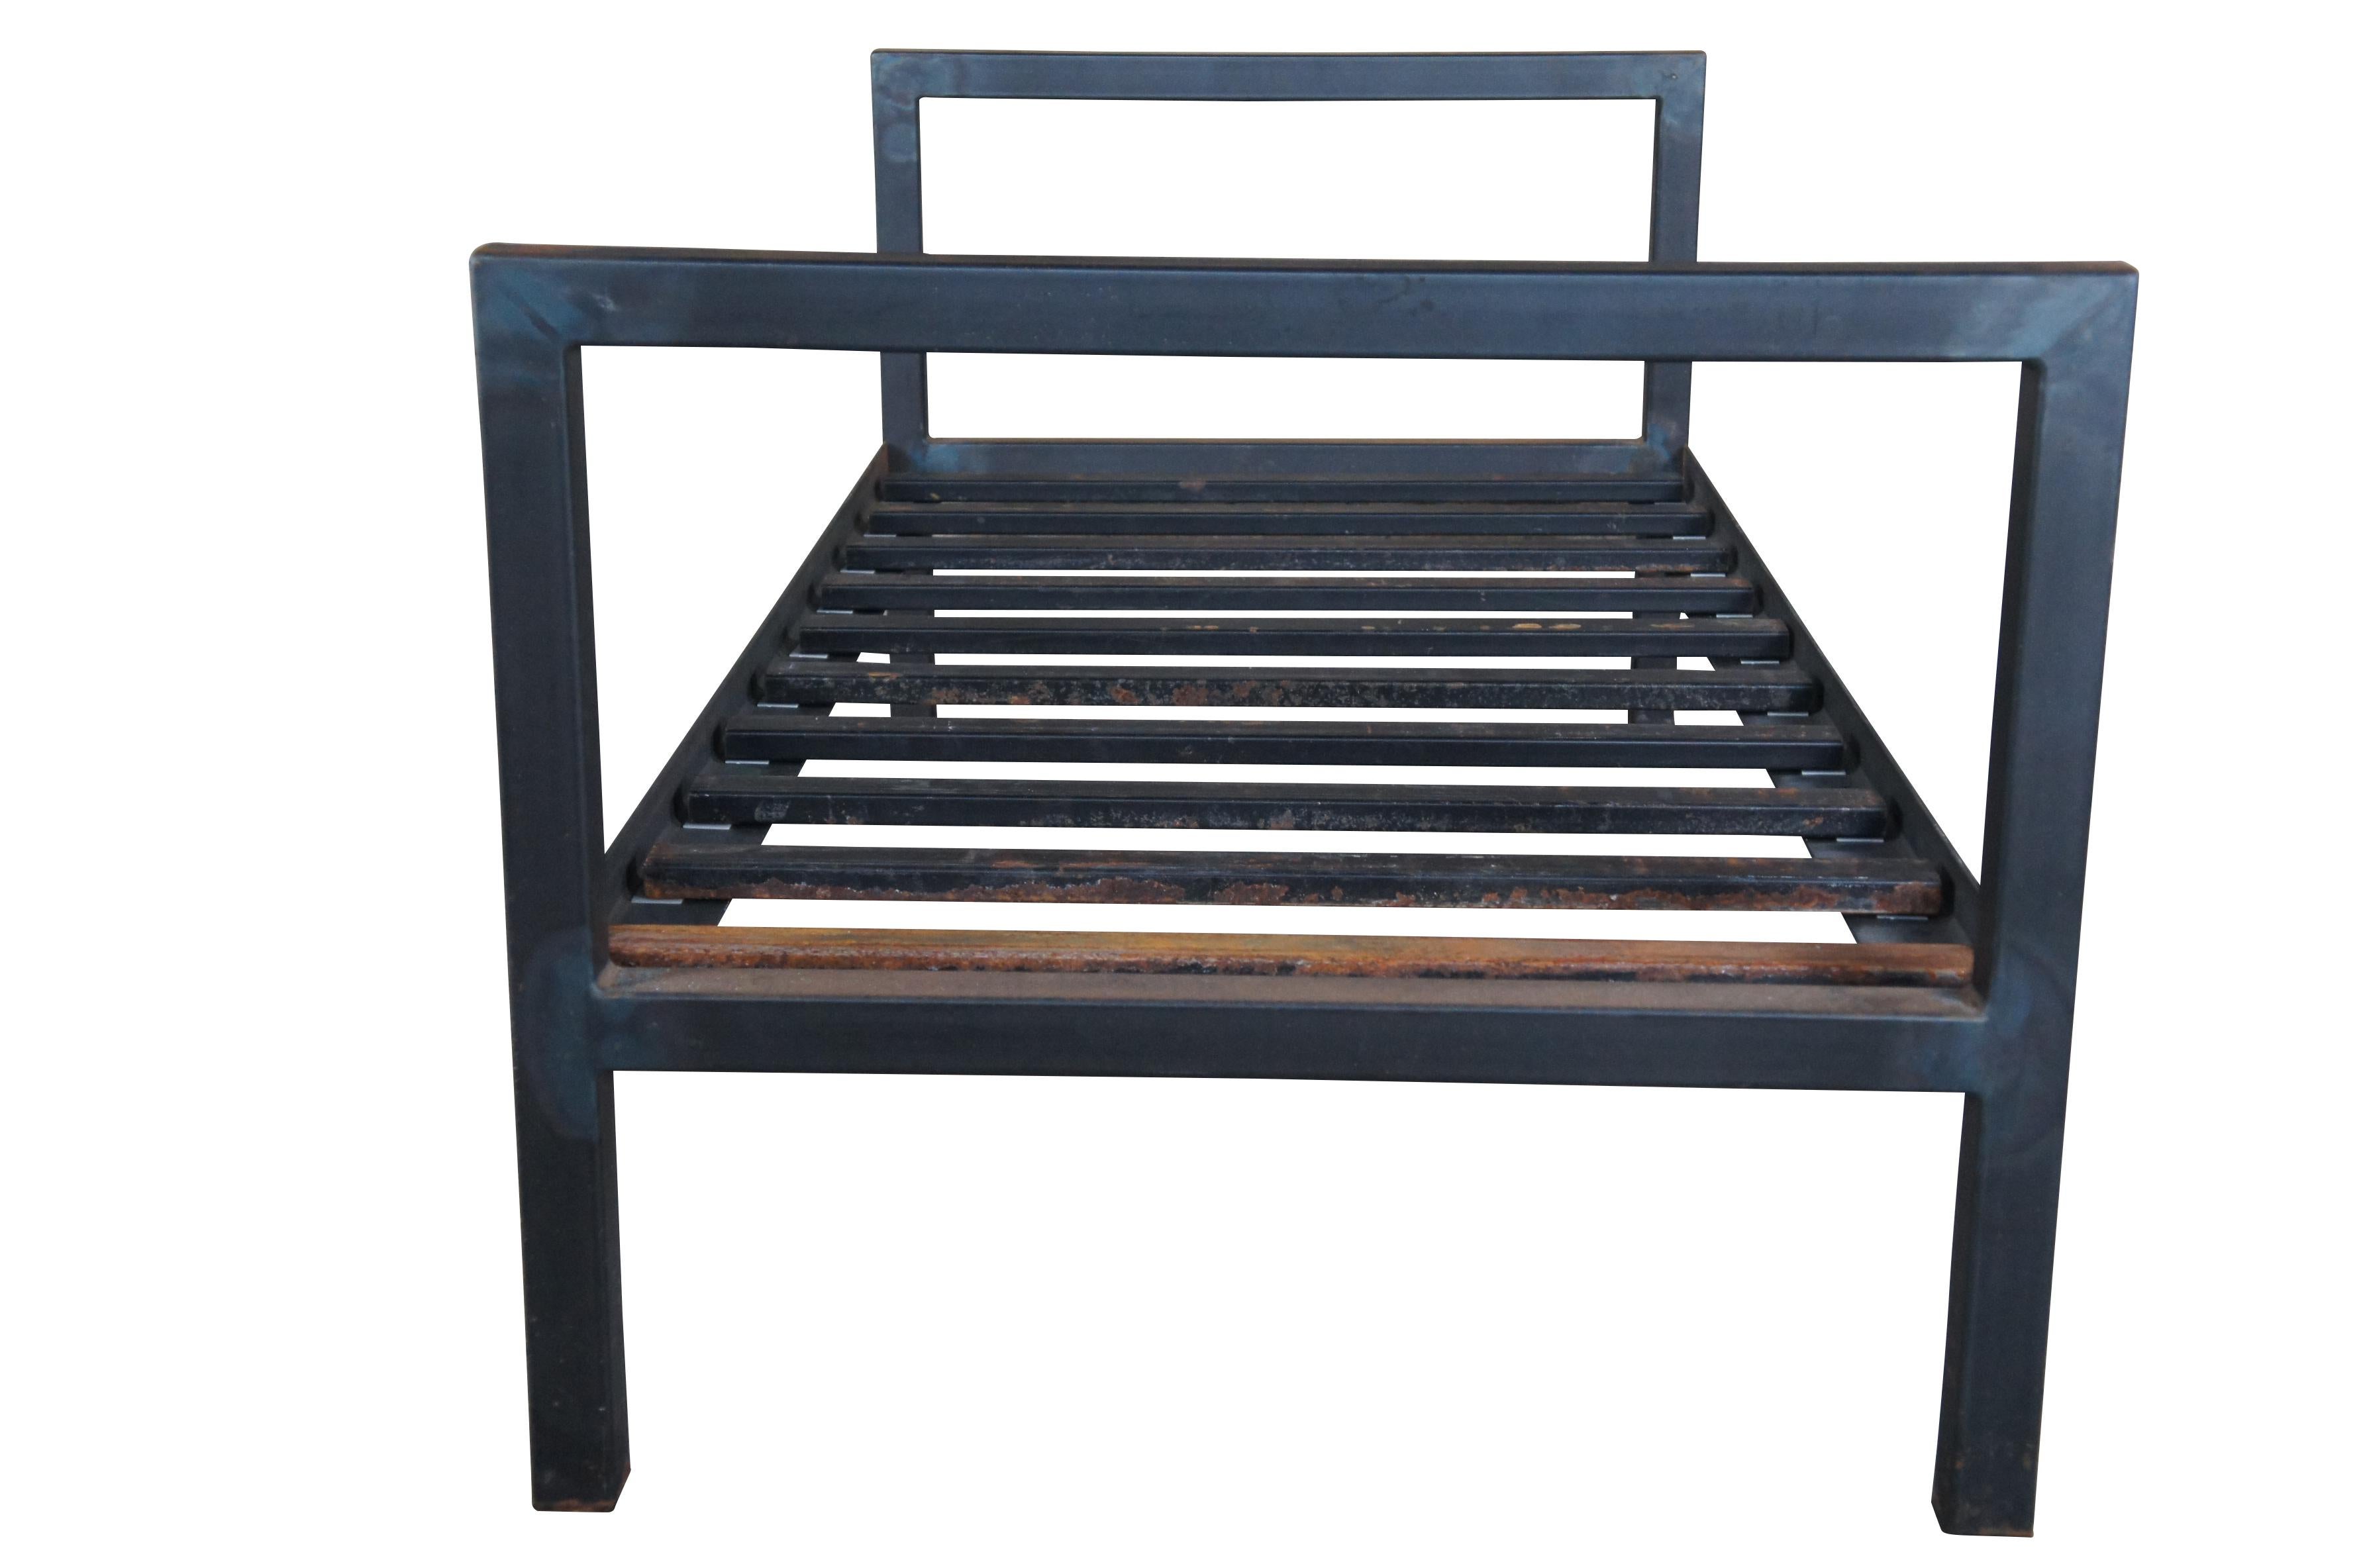 20th century Steel bed / daybed. Features a rustic frame with metal steel cross supports.

DIMENSIONS

77' x 36